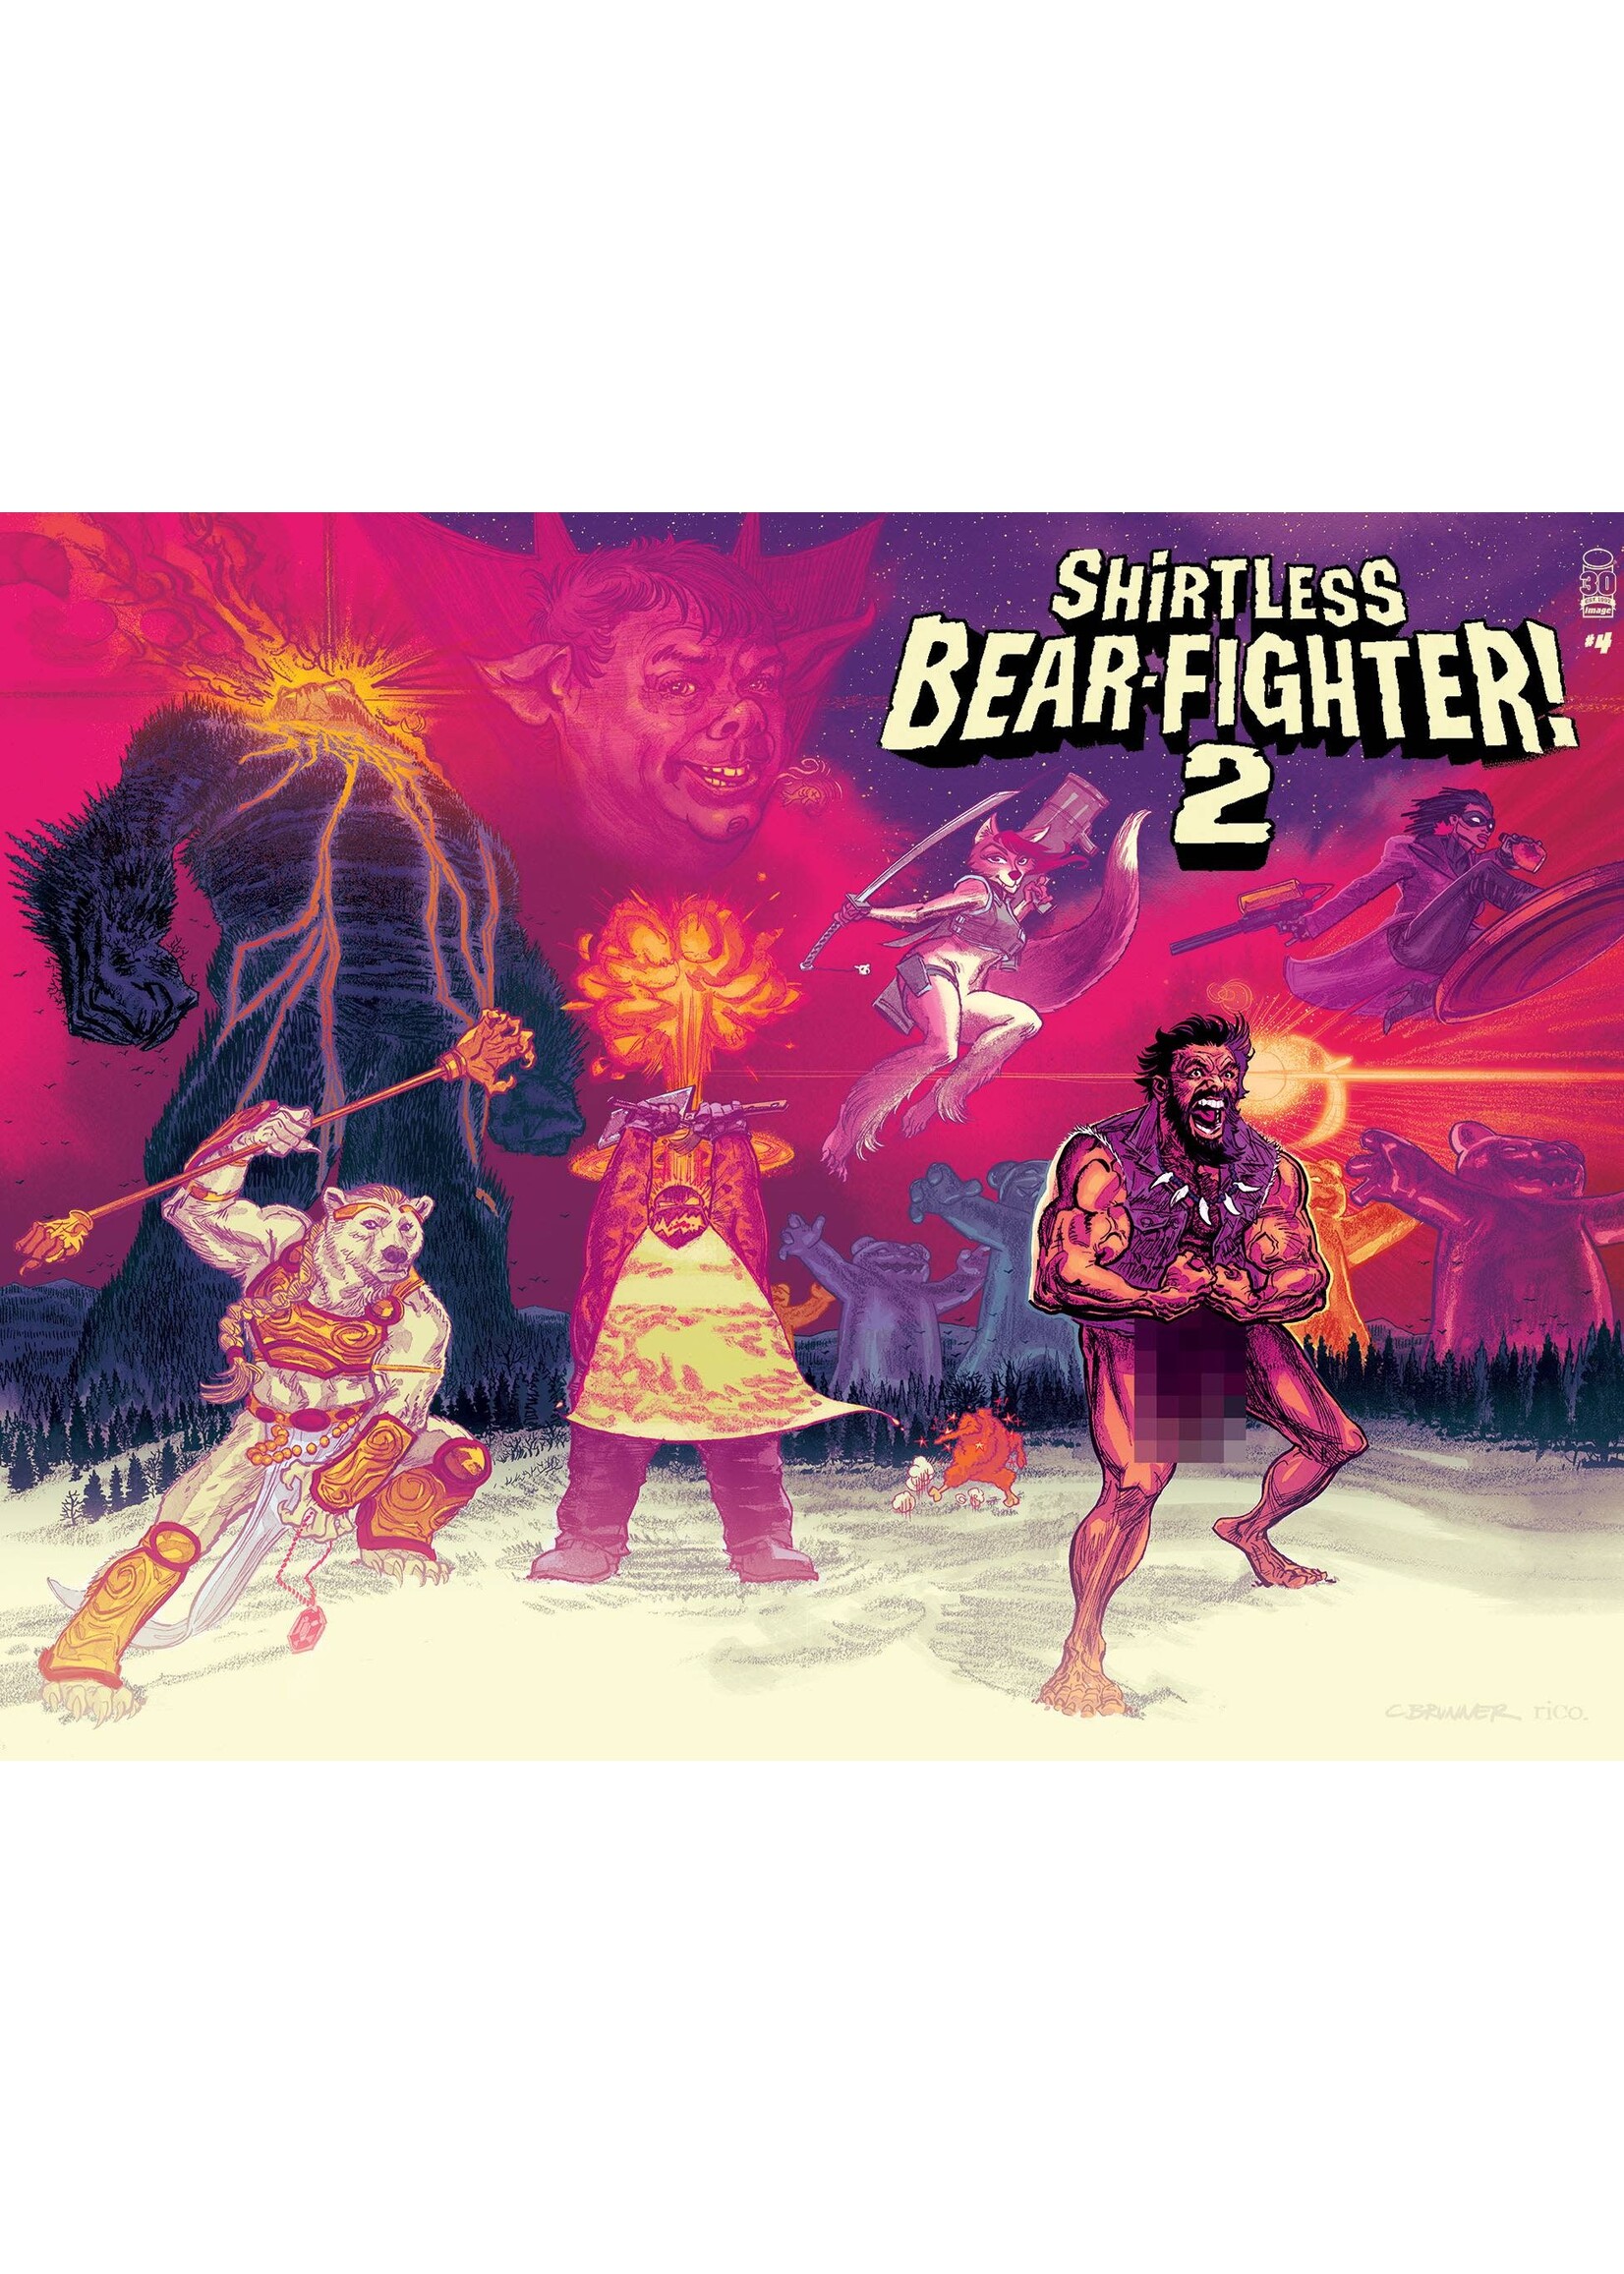 IMAGE COMICS SHIRTLESS BEAR-FIGHTER 2 complete 7 issue series